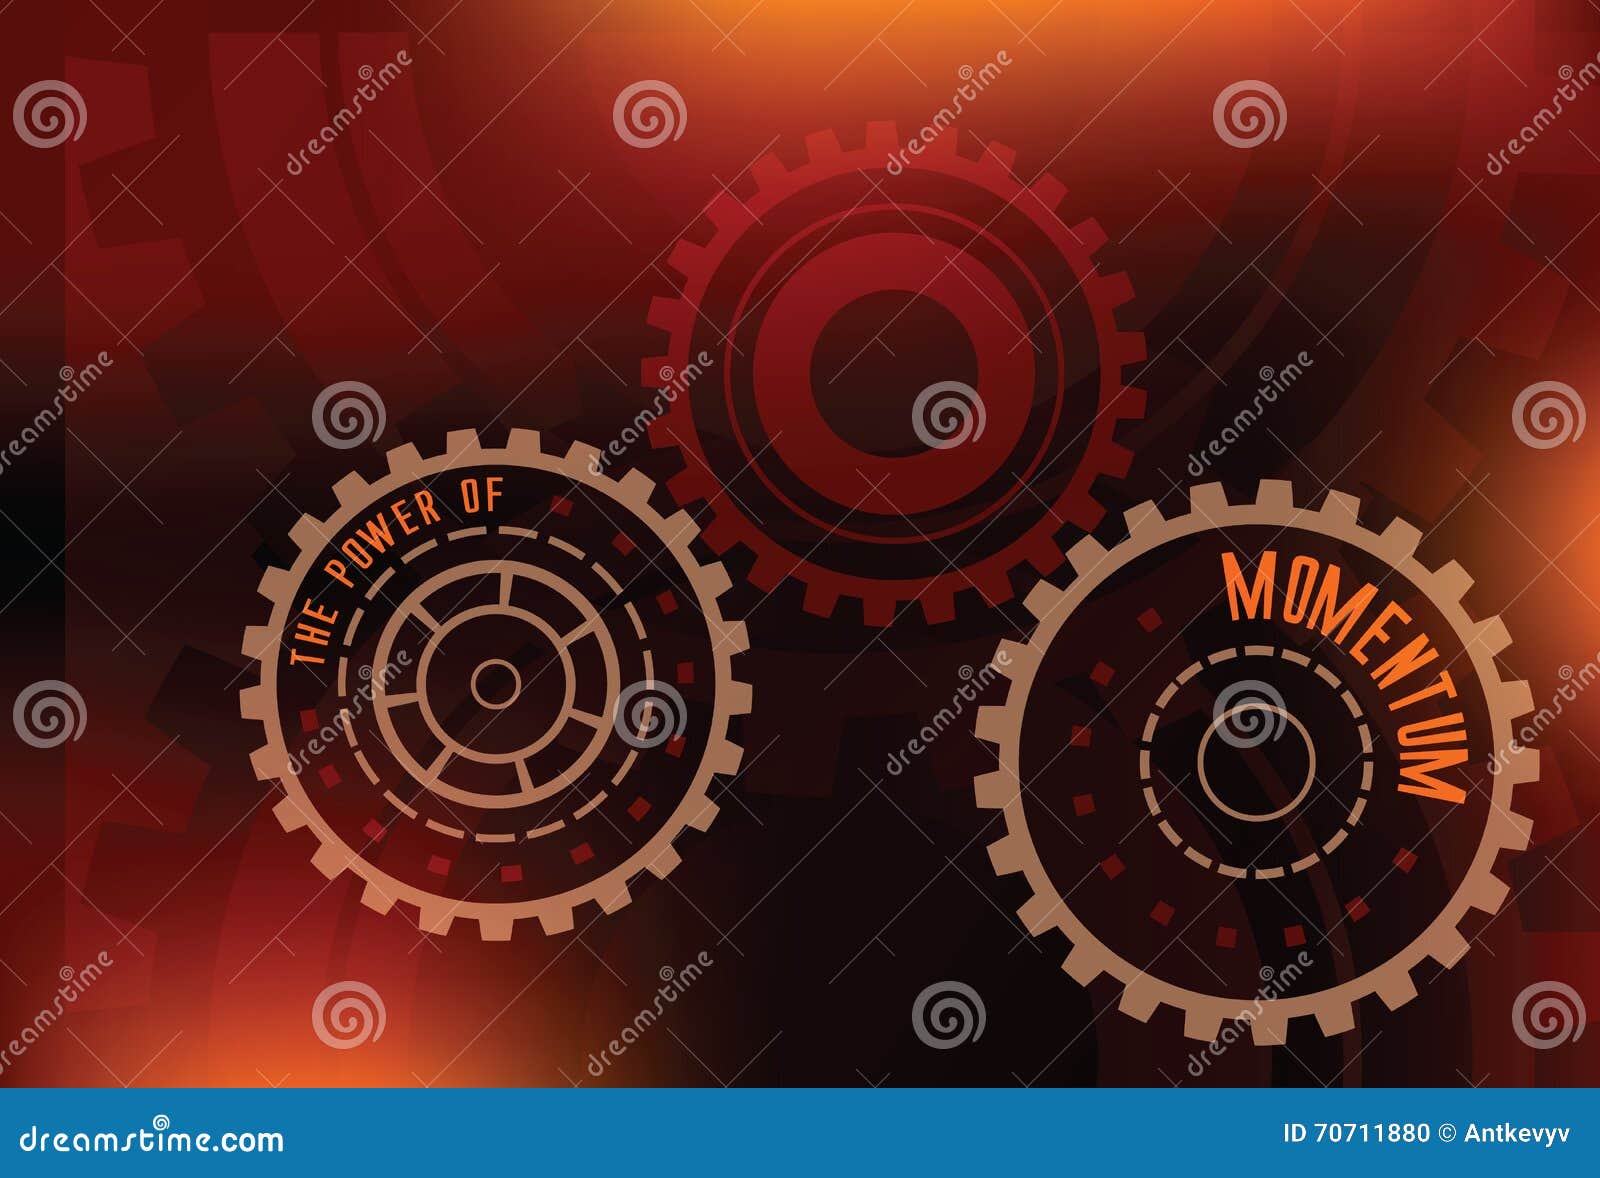 The Power of Momentum Background Stock Vector - Illustration of power,  action: 70711880